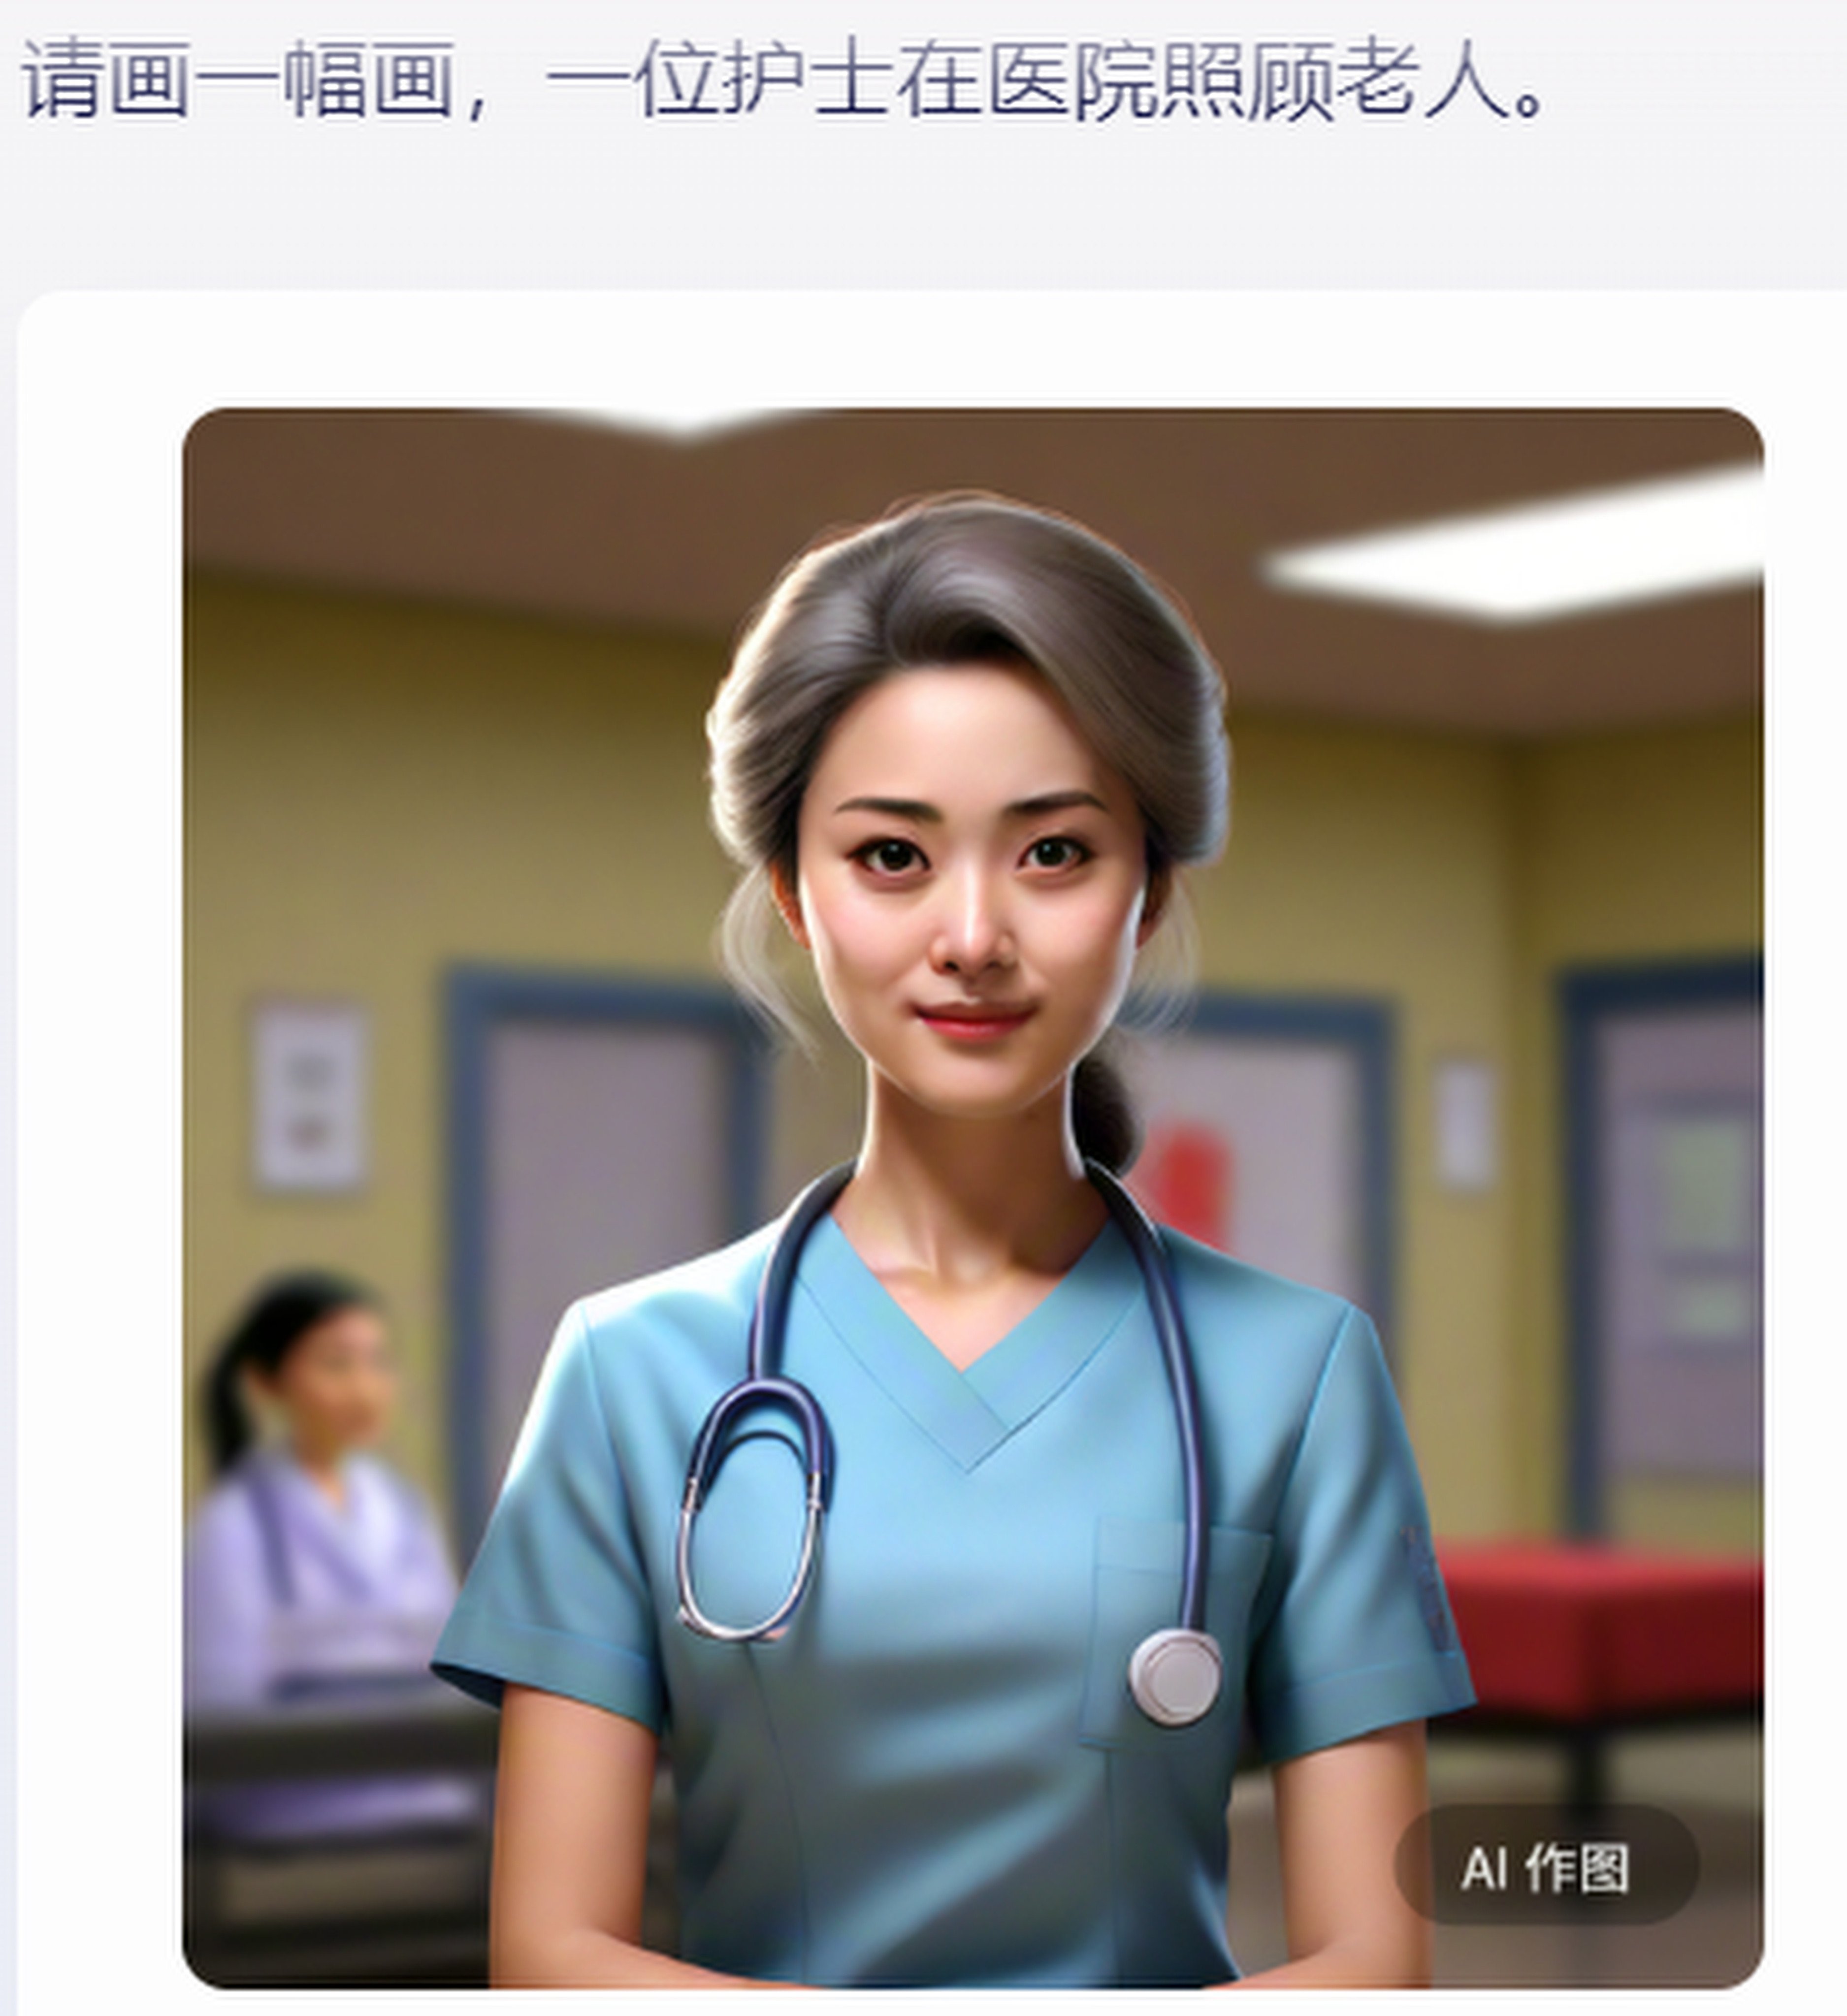 When asked to “generate a picture of a nurse taking care of the elderly”, China’s Ernie Bot produced this picture of a woman. Photo: Ernie Bot